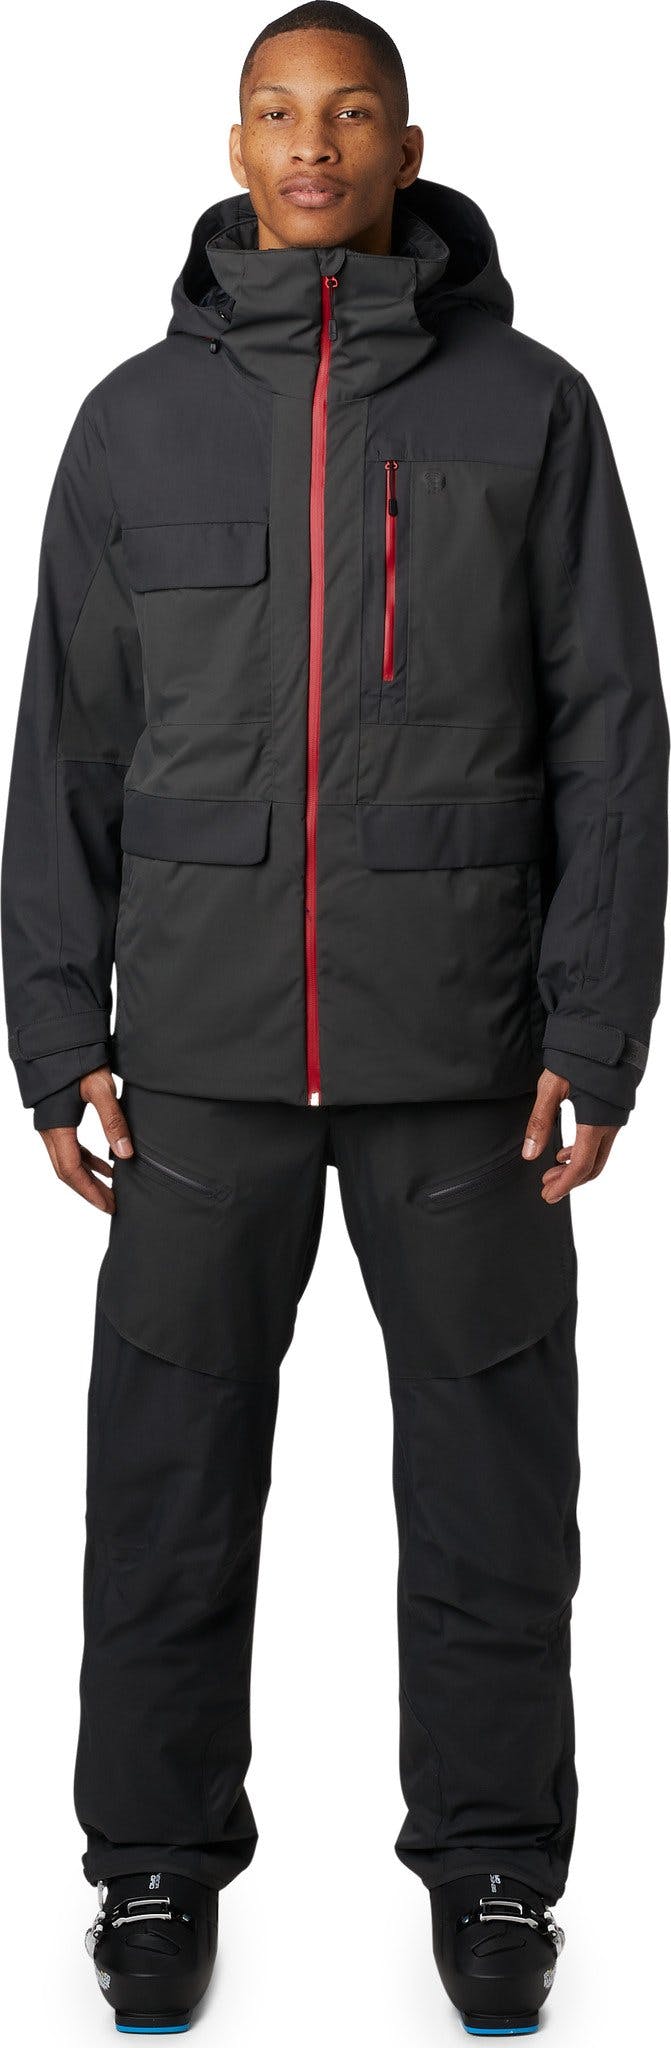 Product gallery image number 5 for product Firefall 2 Insulated Jacket - Men's